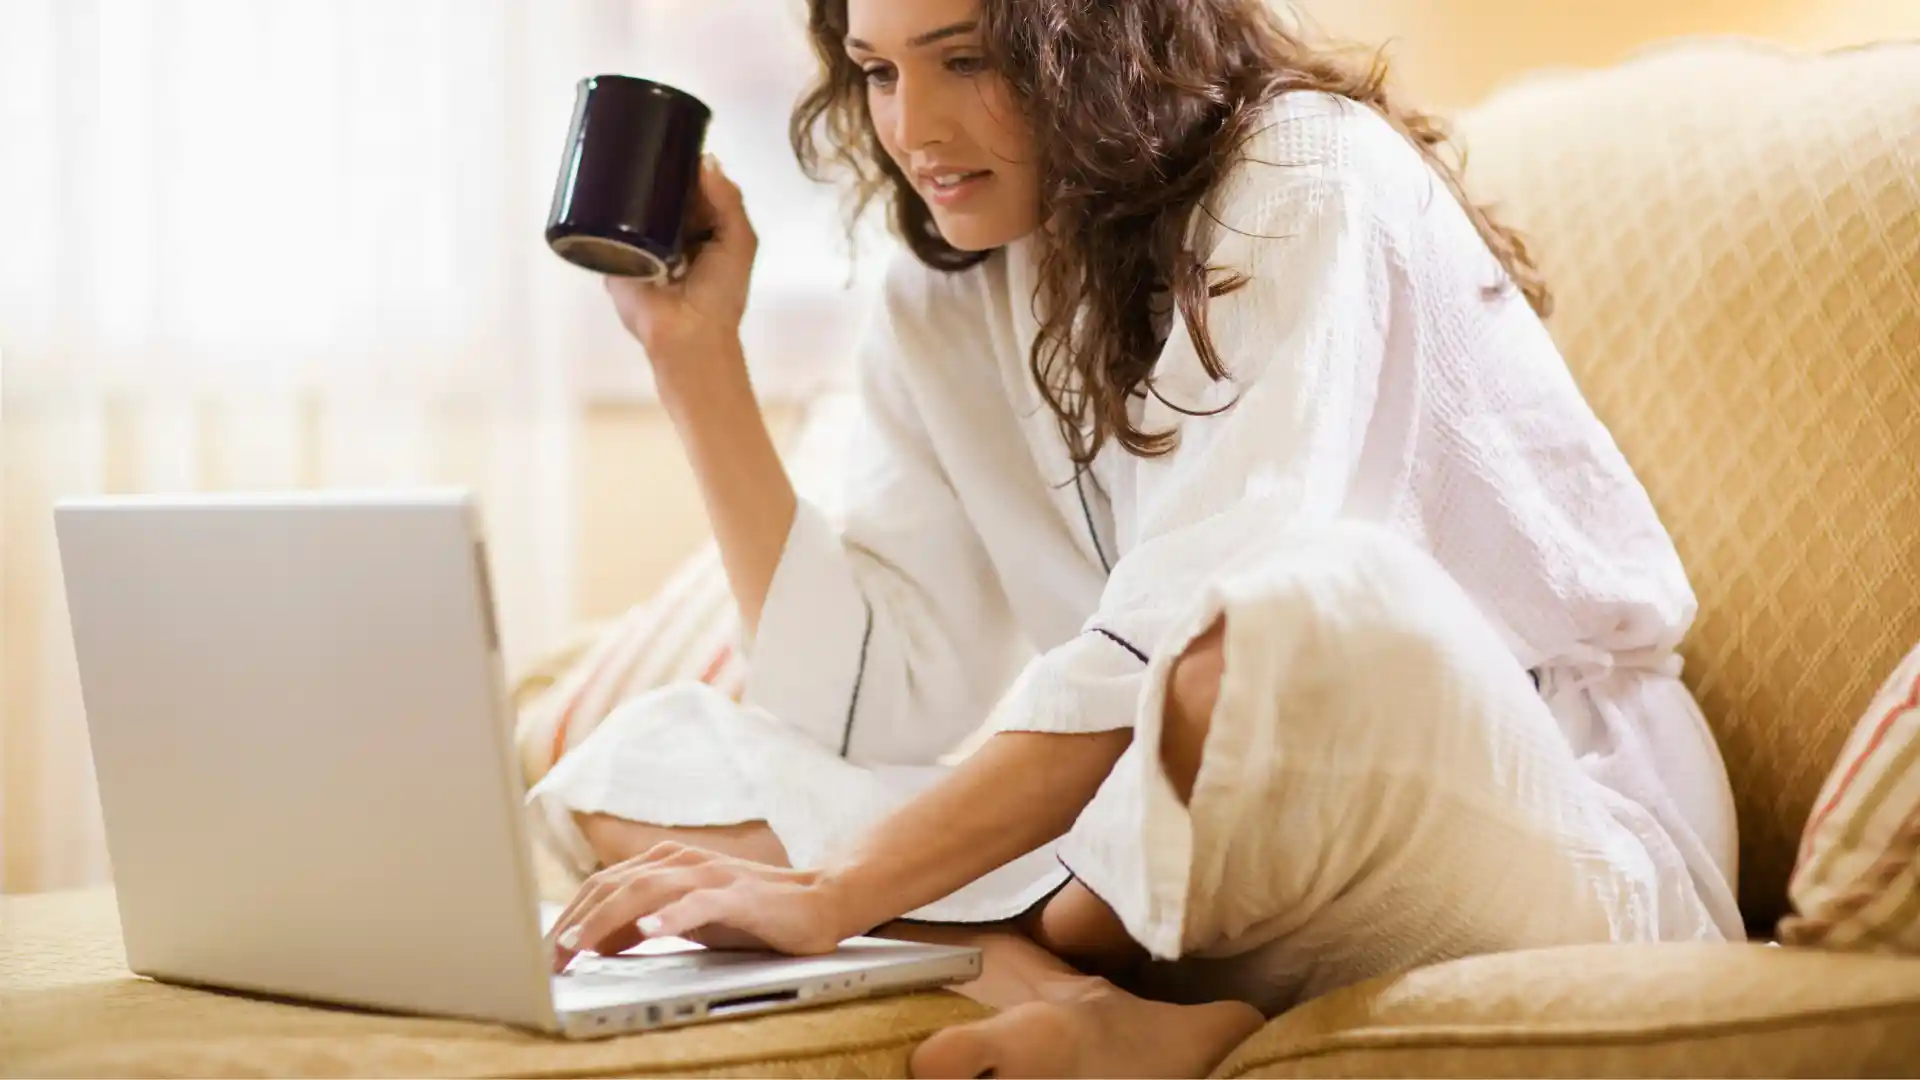 A woman sitting on a couch with a laptop and a cup of coffee